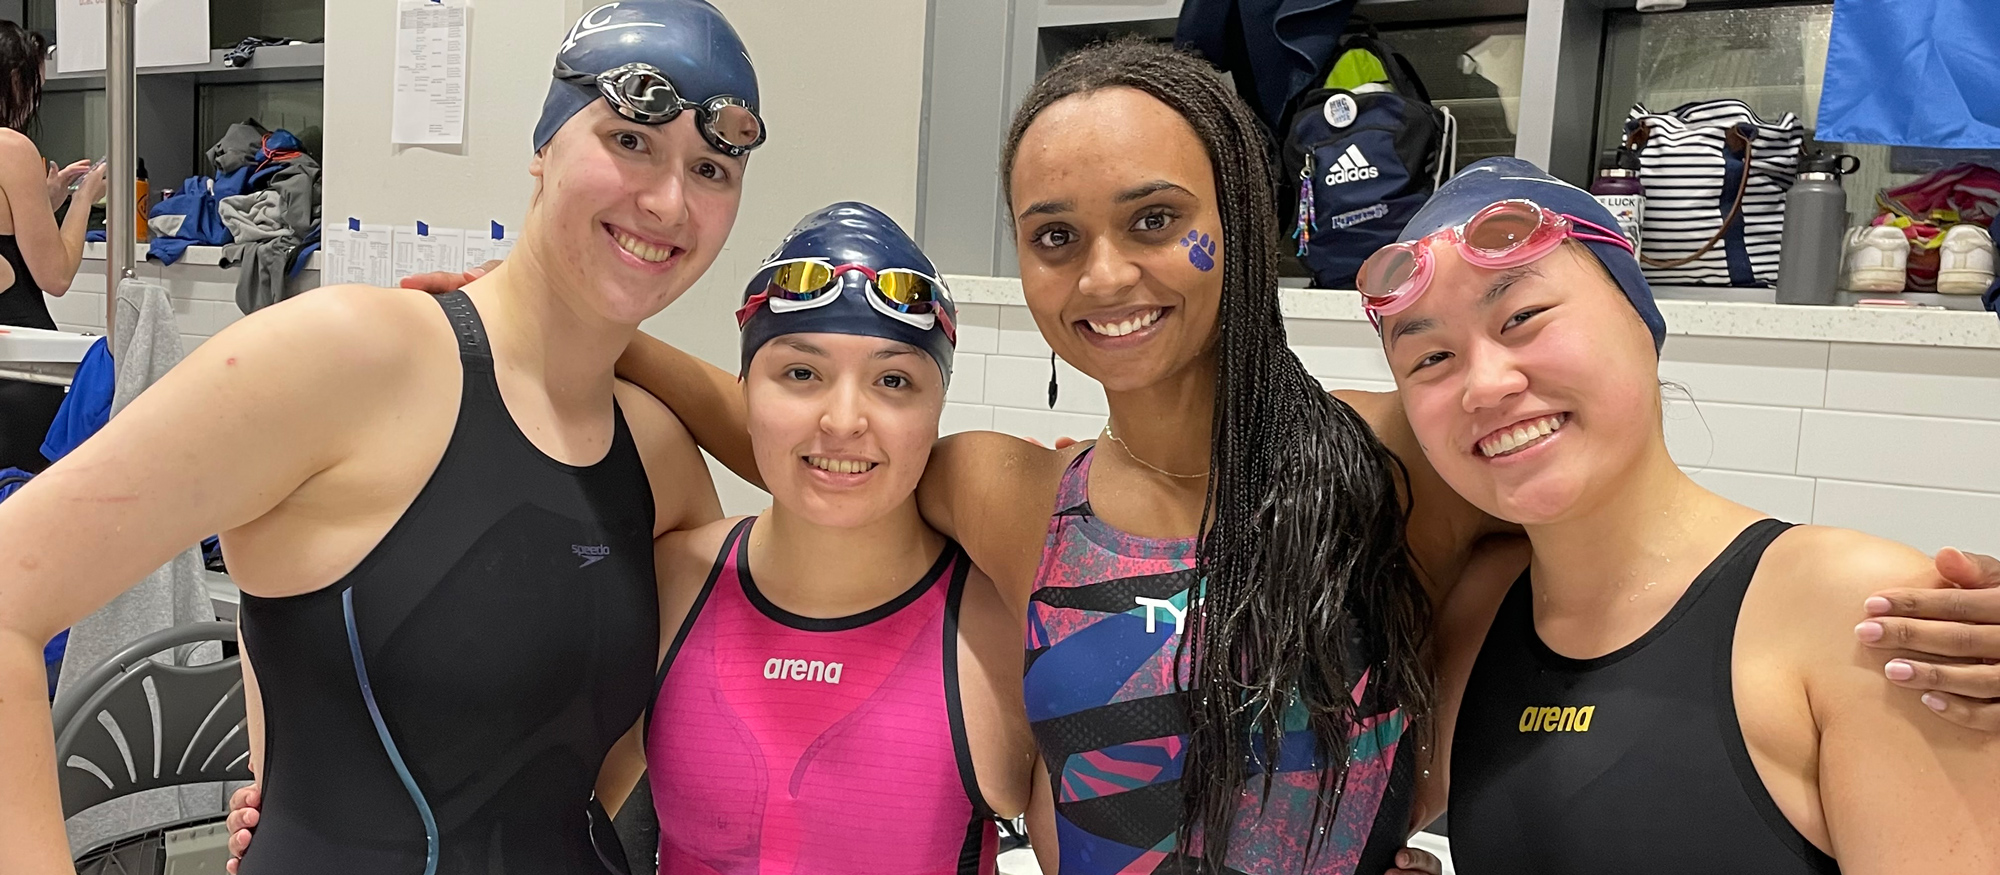 From left to right, Evelyn Bushway, Carolina Loayza, Adji Diouf, and Megan Schneider broke Mount Holyoke's program record in the 200-yard medley relay on Feb. 18, 2023 at the NEWMAC Championships.